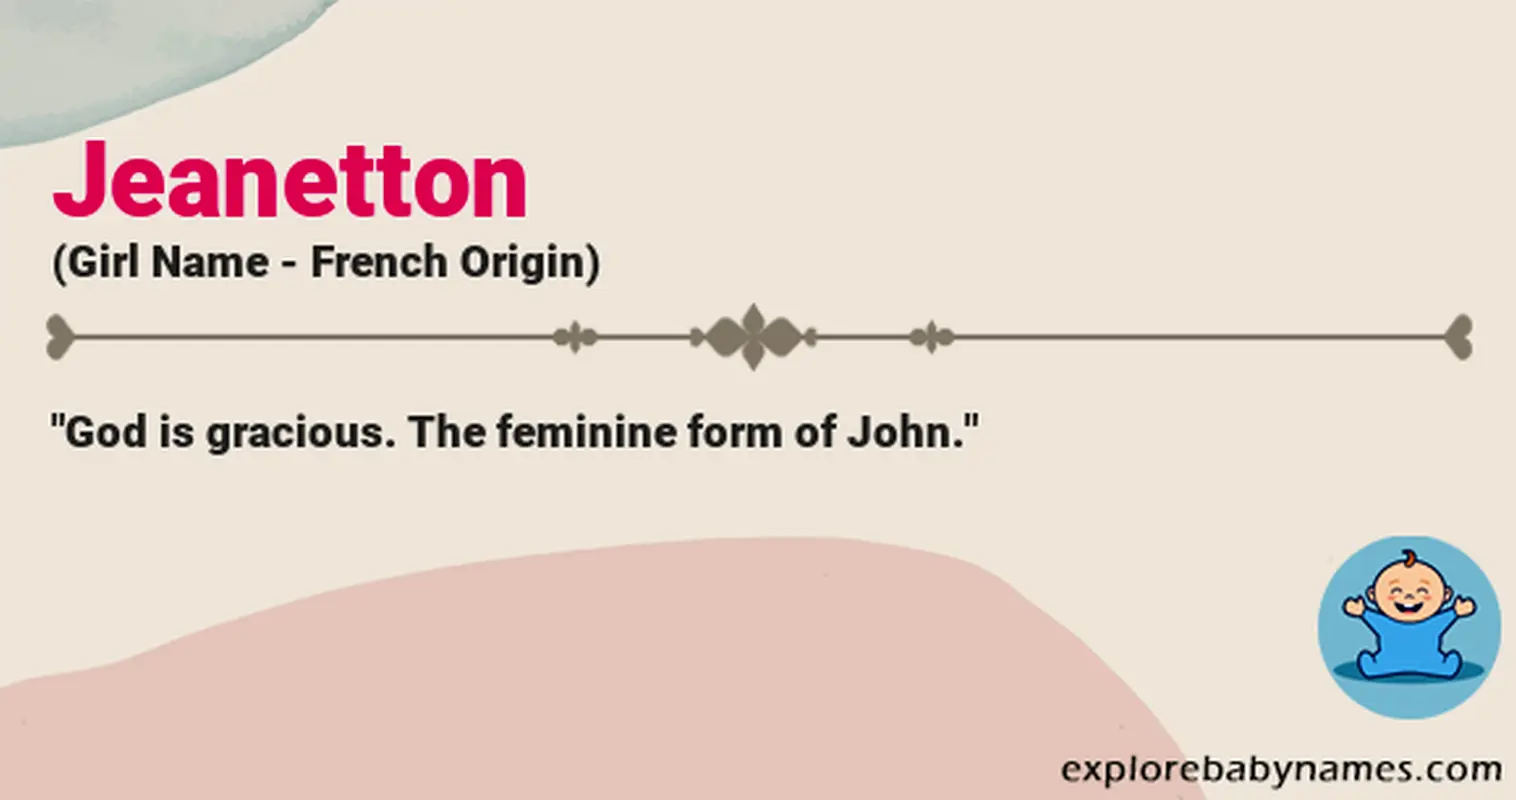 Meaning of Jeanetton